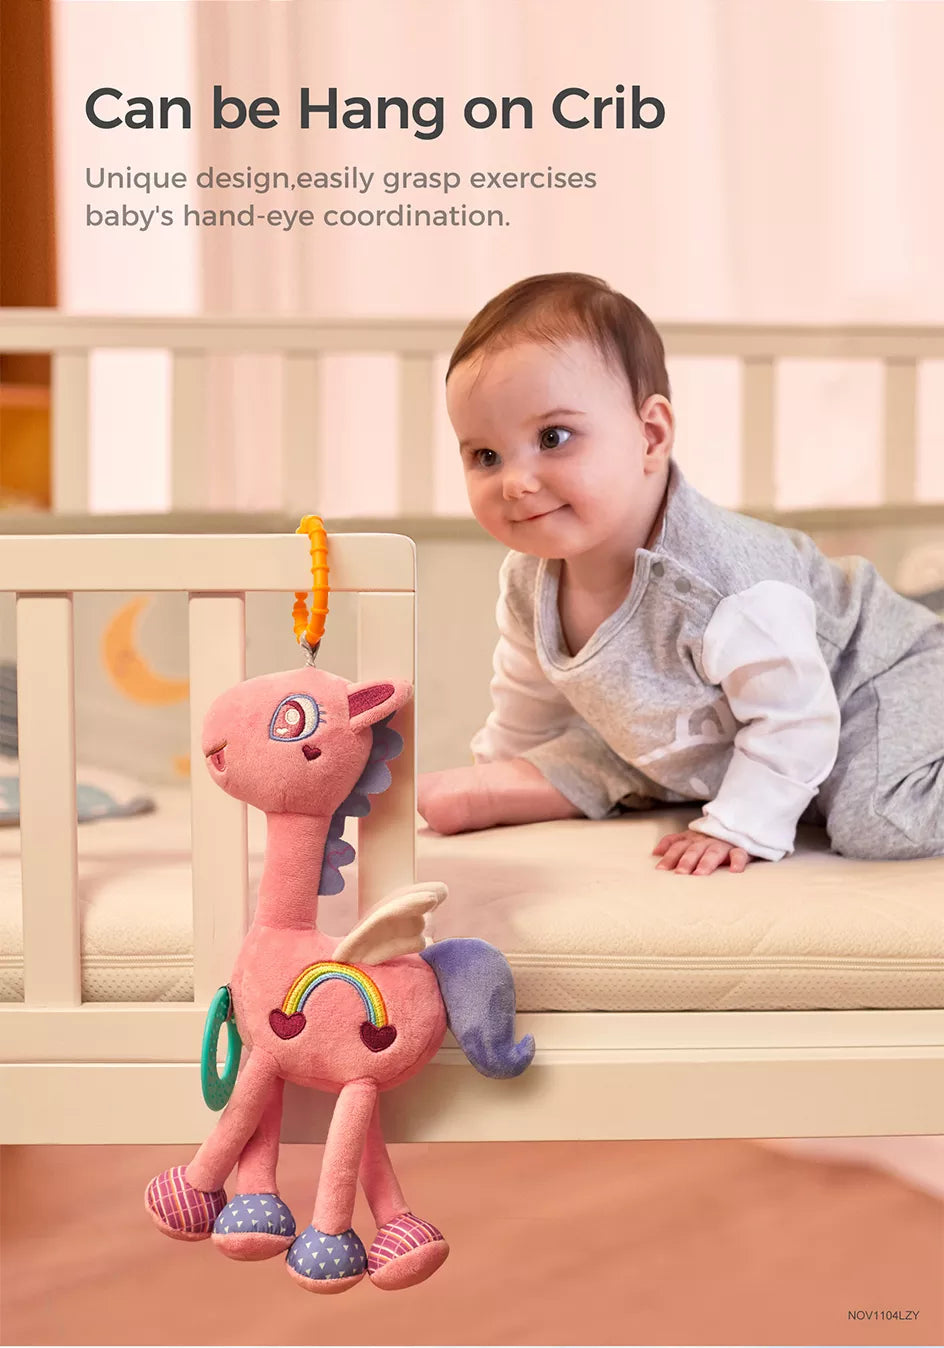 Crib teething toy in adorable baby pink